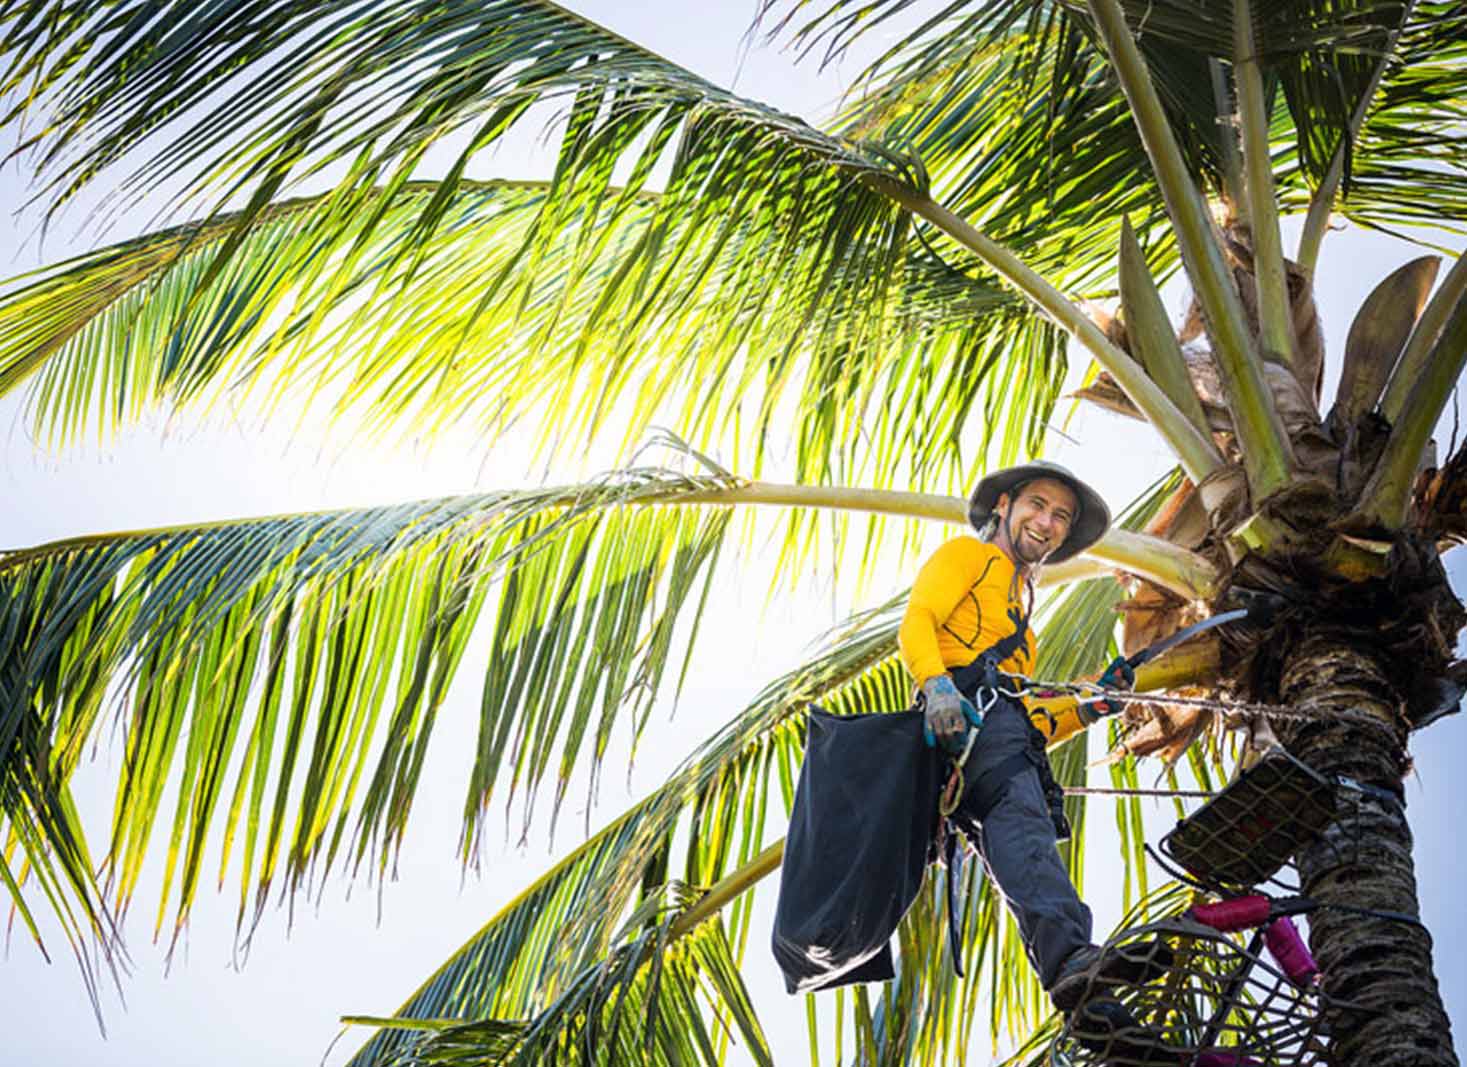 Tips for saving money on palm tree trimming in Hawaii